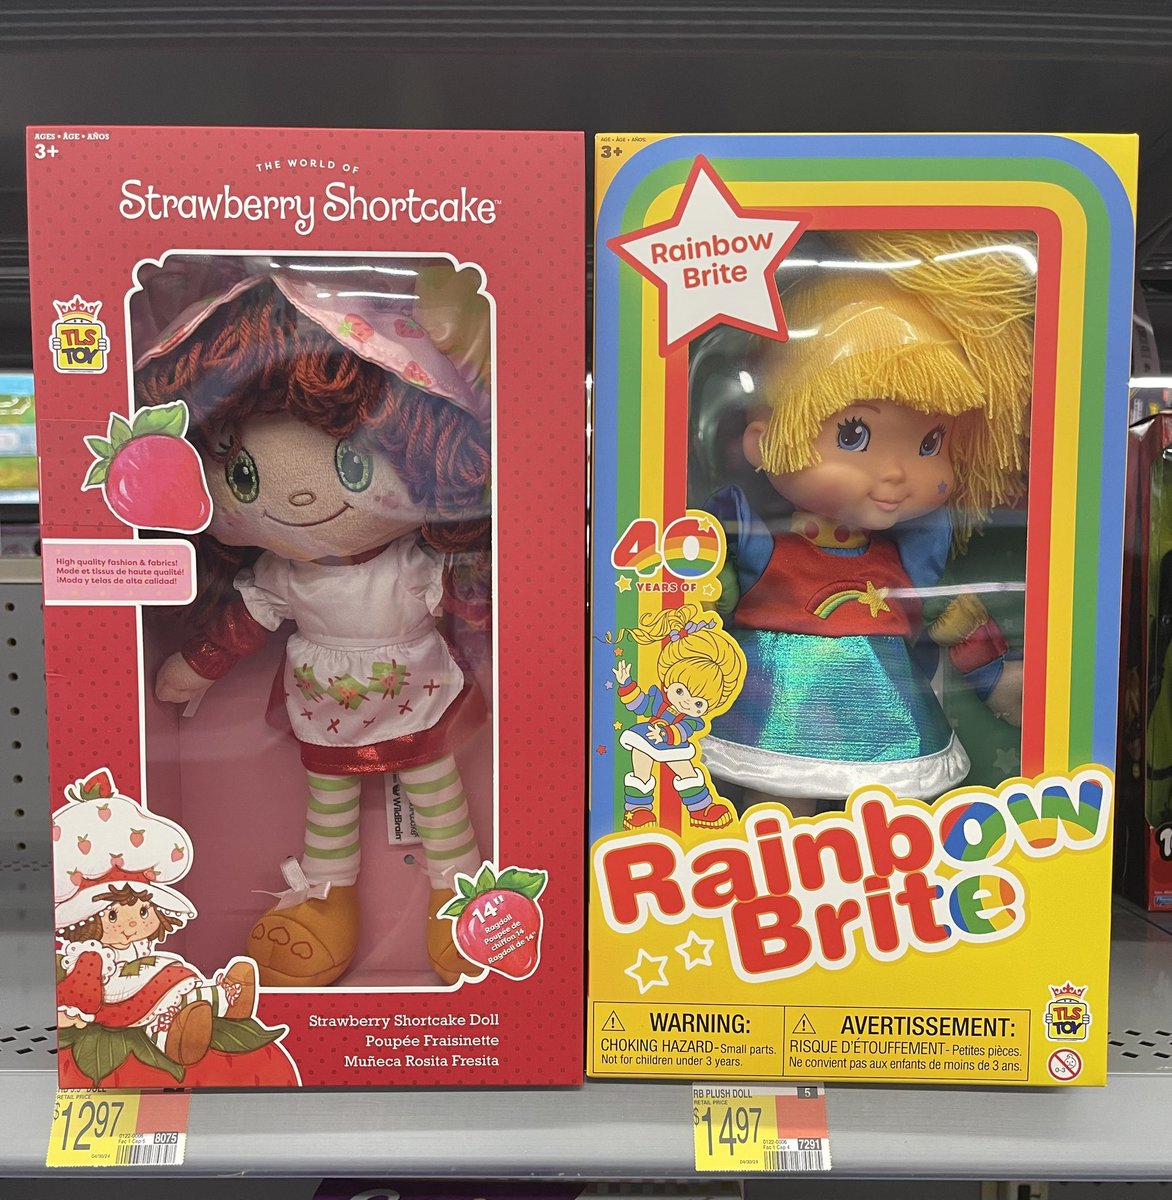 Whoa! Walmart has the 80’s “Rainbow Brite” and “Strawberry Shortcake”. Obviously I have to buy these for my daughter…